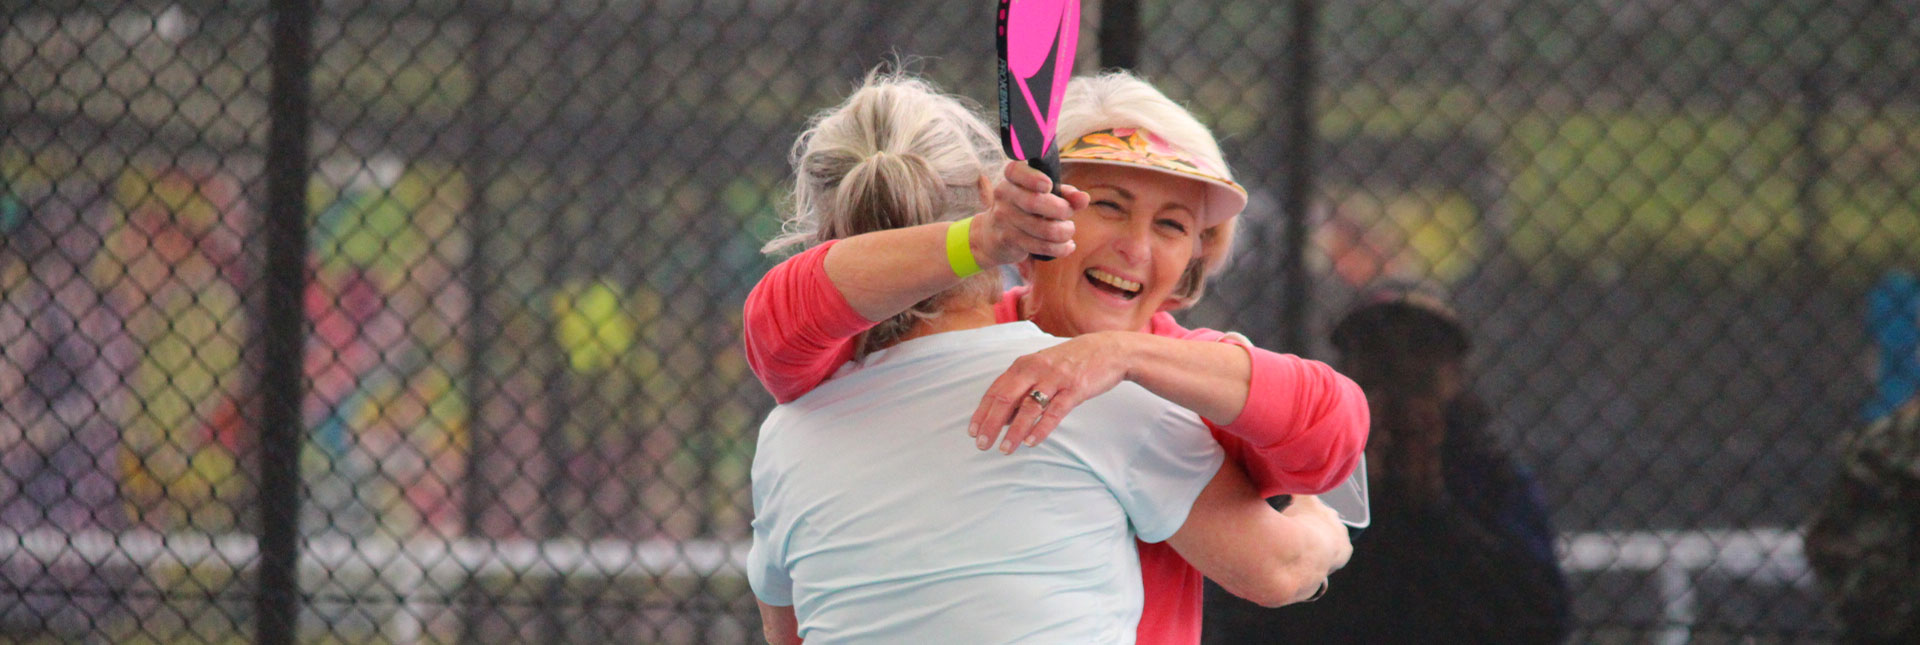 two women hugging after a match of pickleball